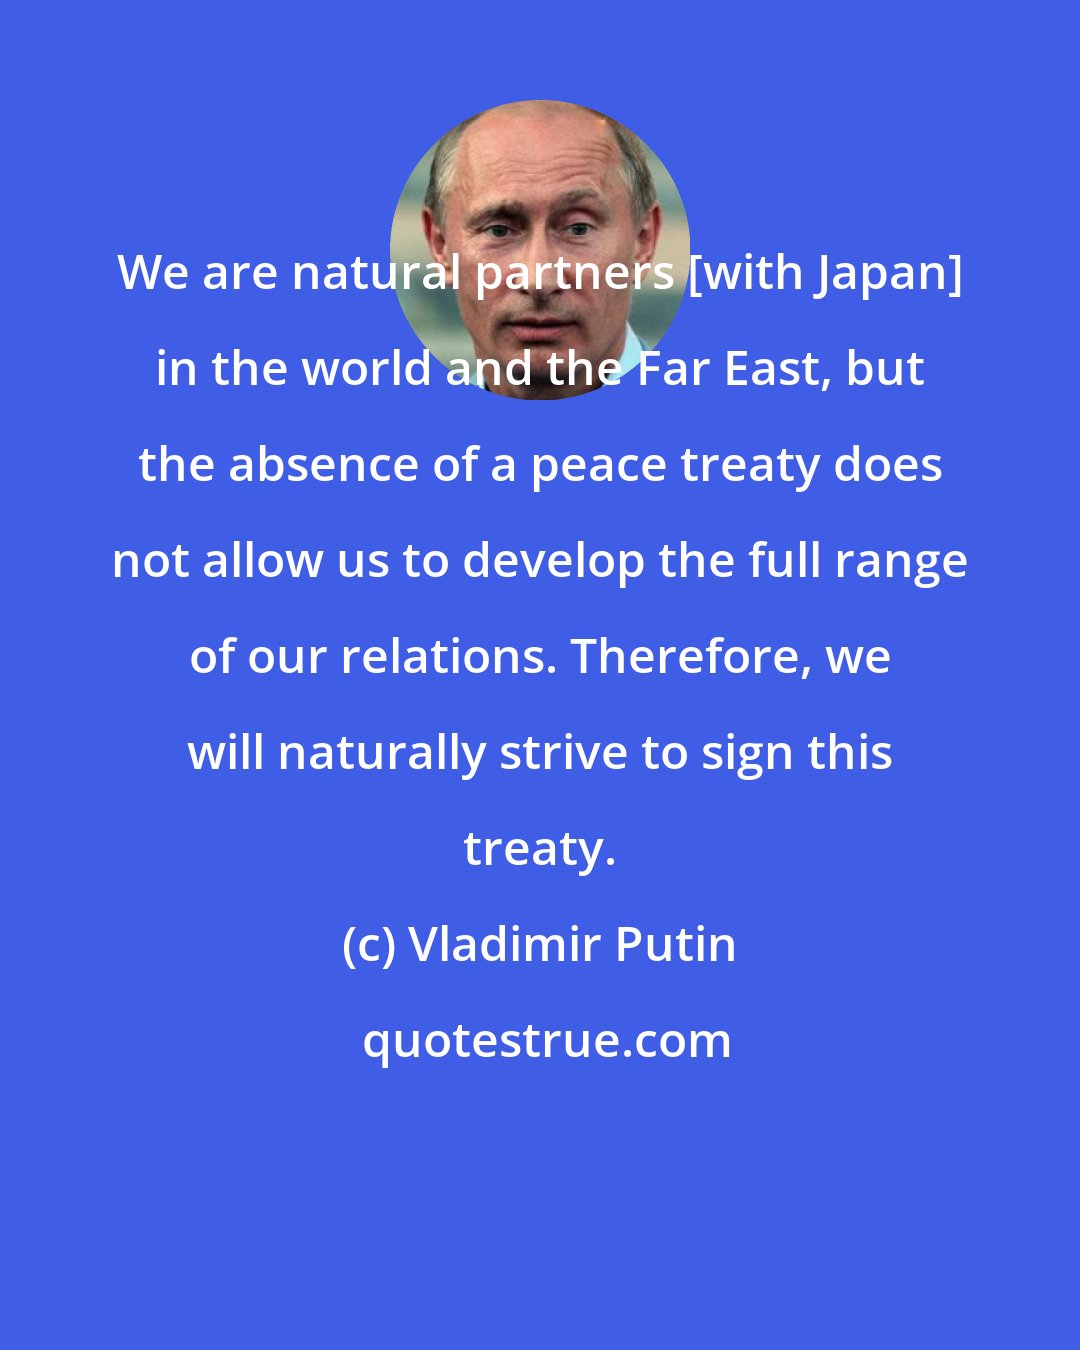 Vladimir Putin: We are natural partners [with Japan] in the world and the Far East, but the absence of a peace treaty does not allow us to develop the full range of our relations. Therefore, we will naturally strive to sign this treaty.